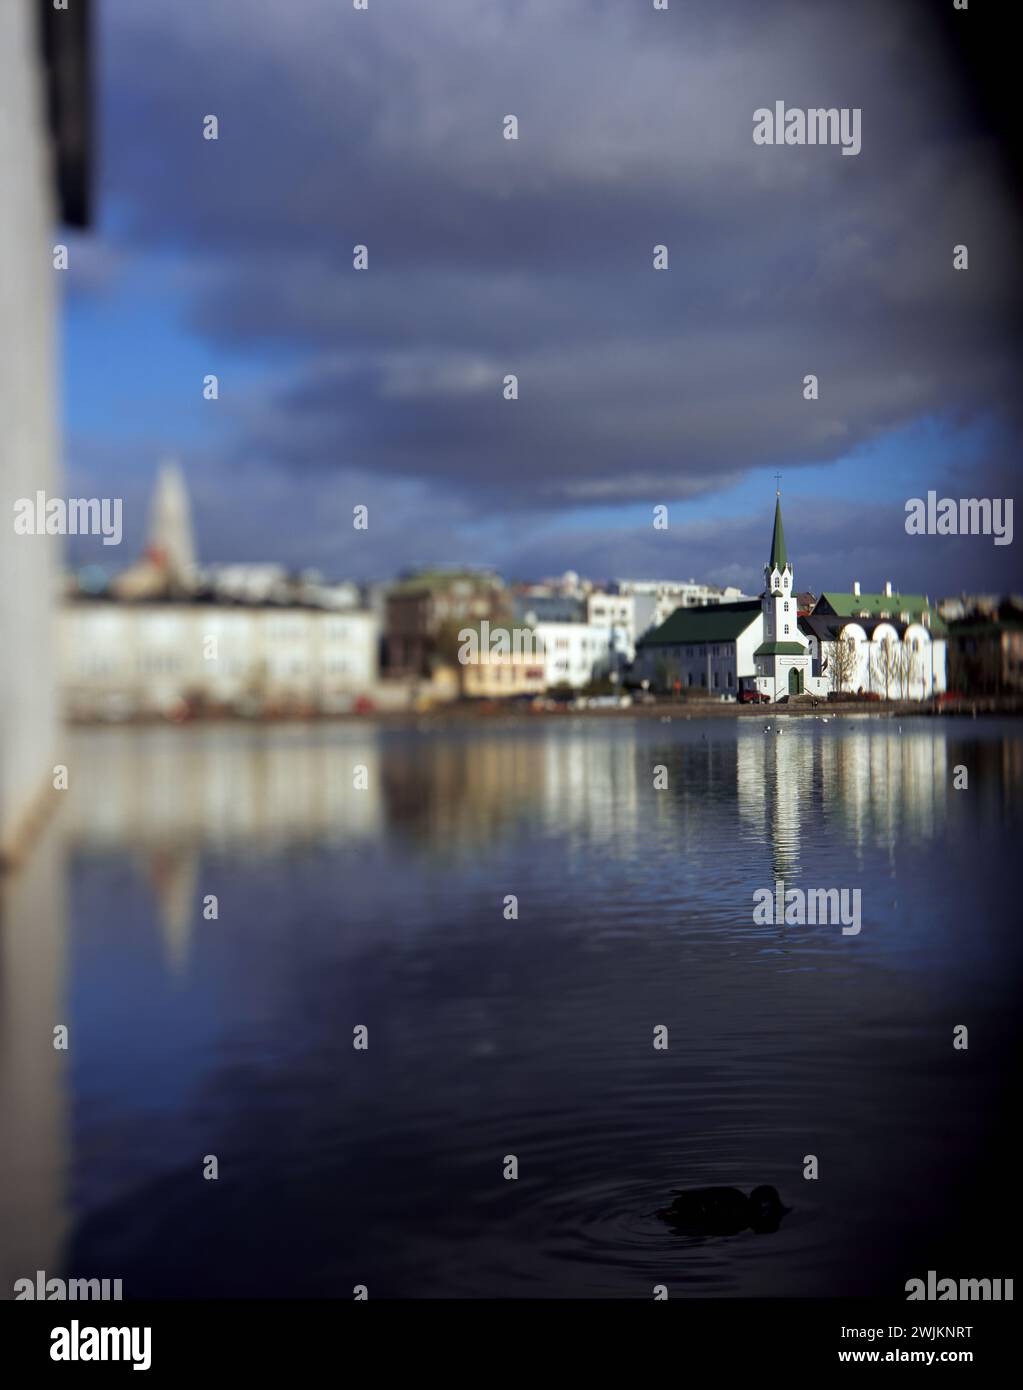 A body of water with buildings in the background Stock Photo